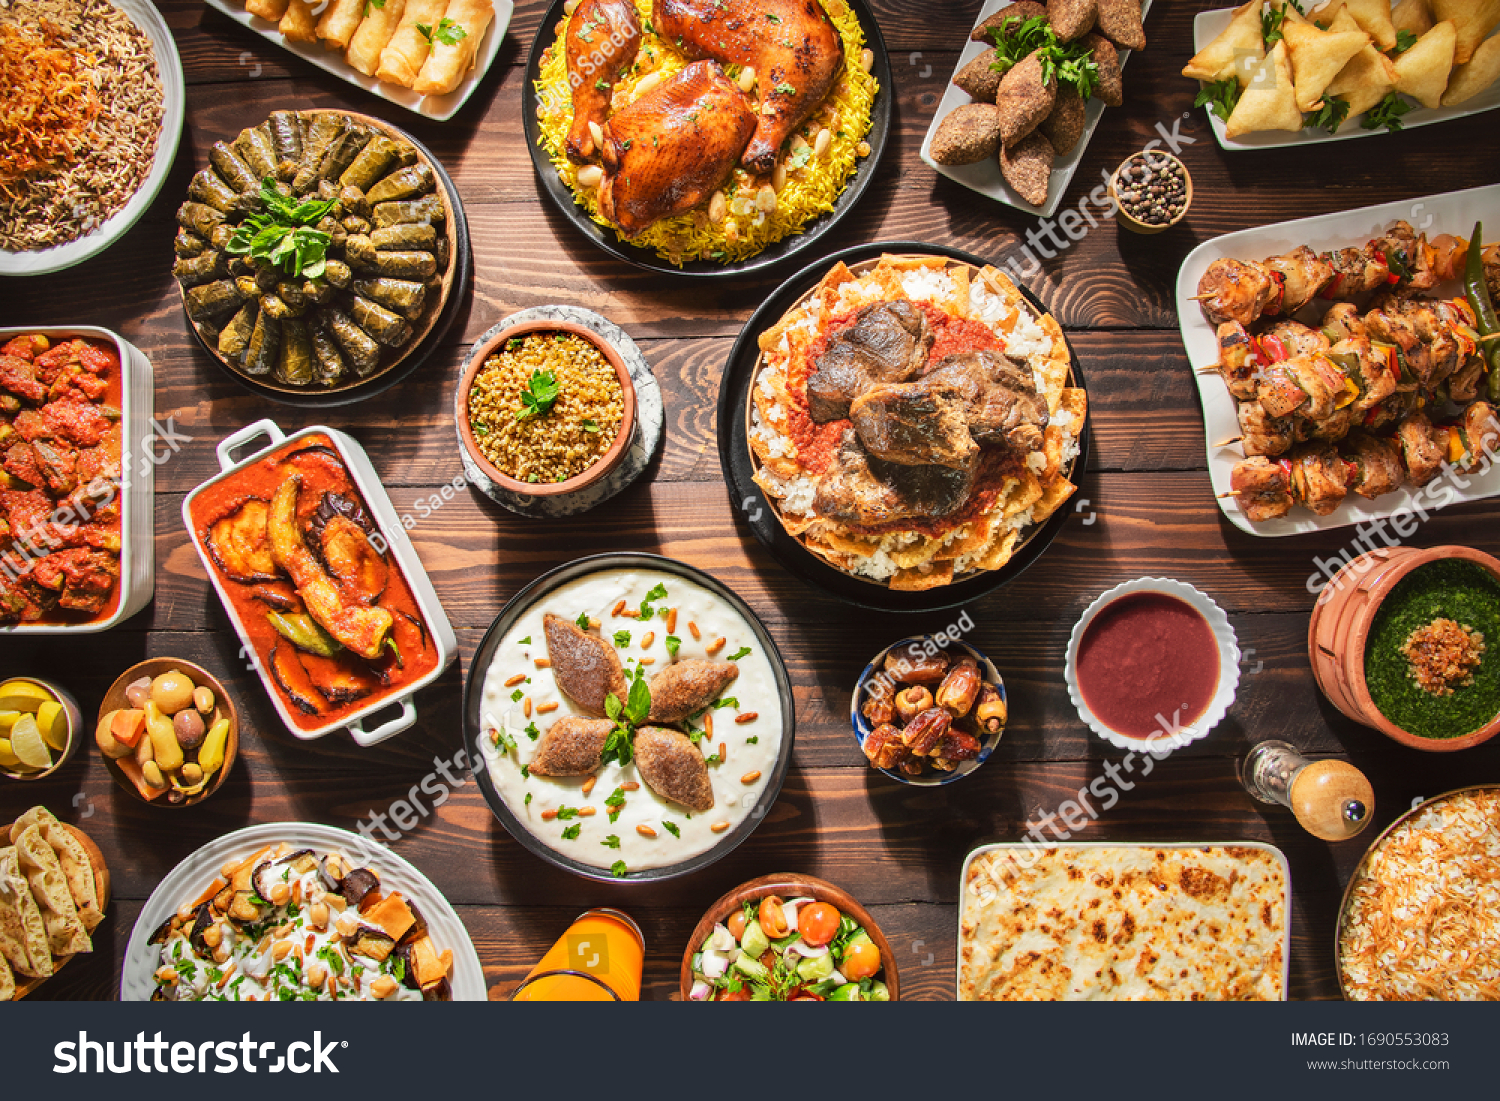 Arabic Cuisine: Middle Eastern traditional lunch. It's also Ramadan "Iftar". The meal eaten by Muslims after sunset during Ramadan. Assorted of Arabic oriental dishes. top view with close up.  #1690553083